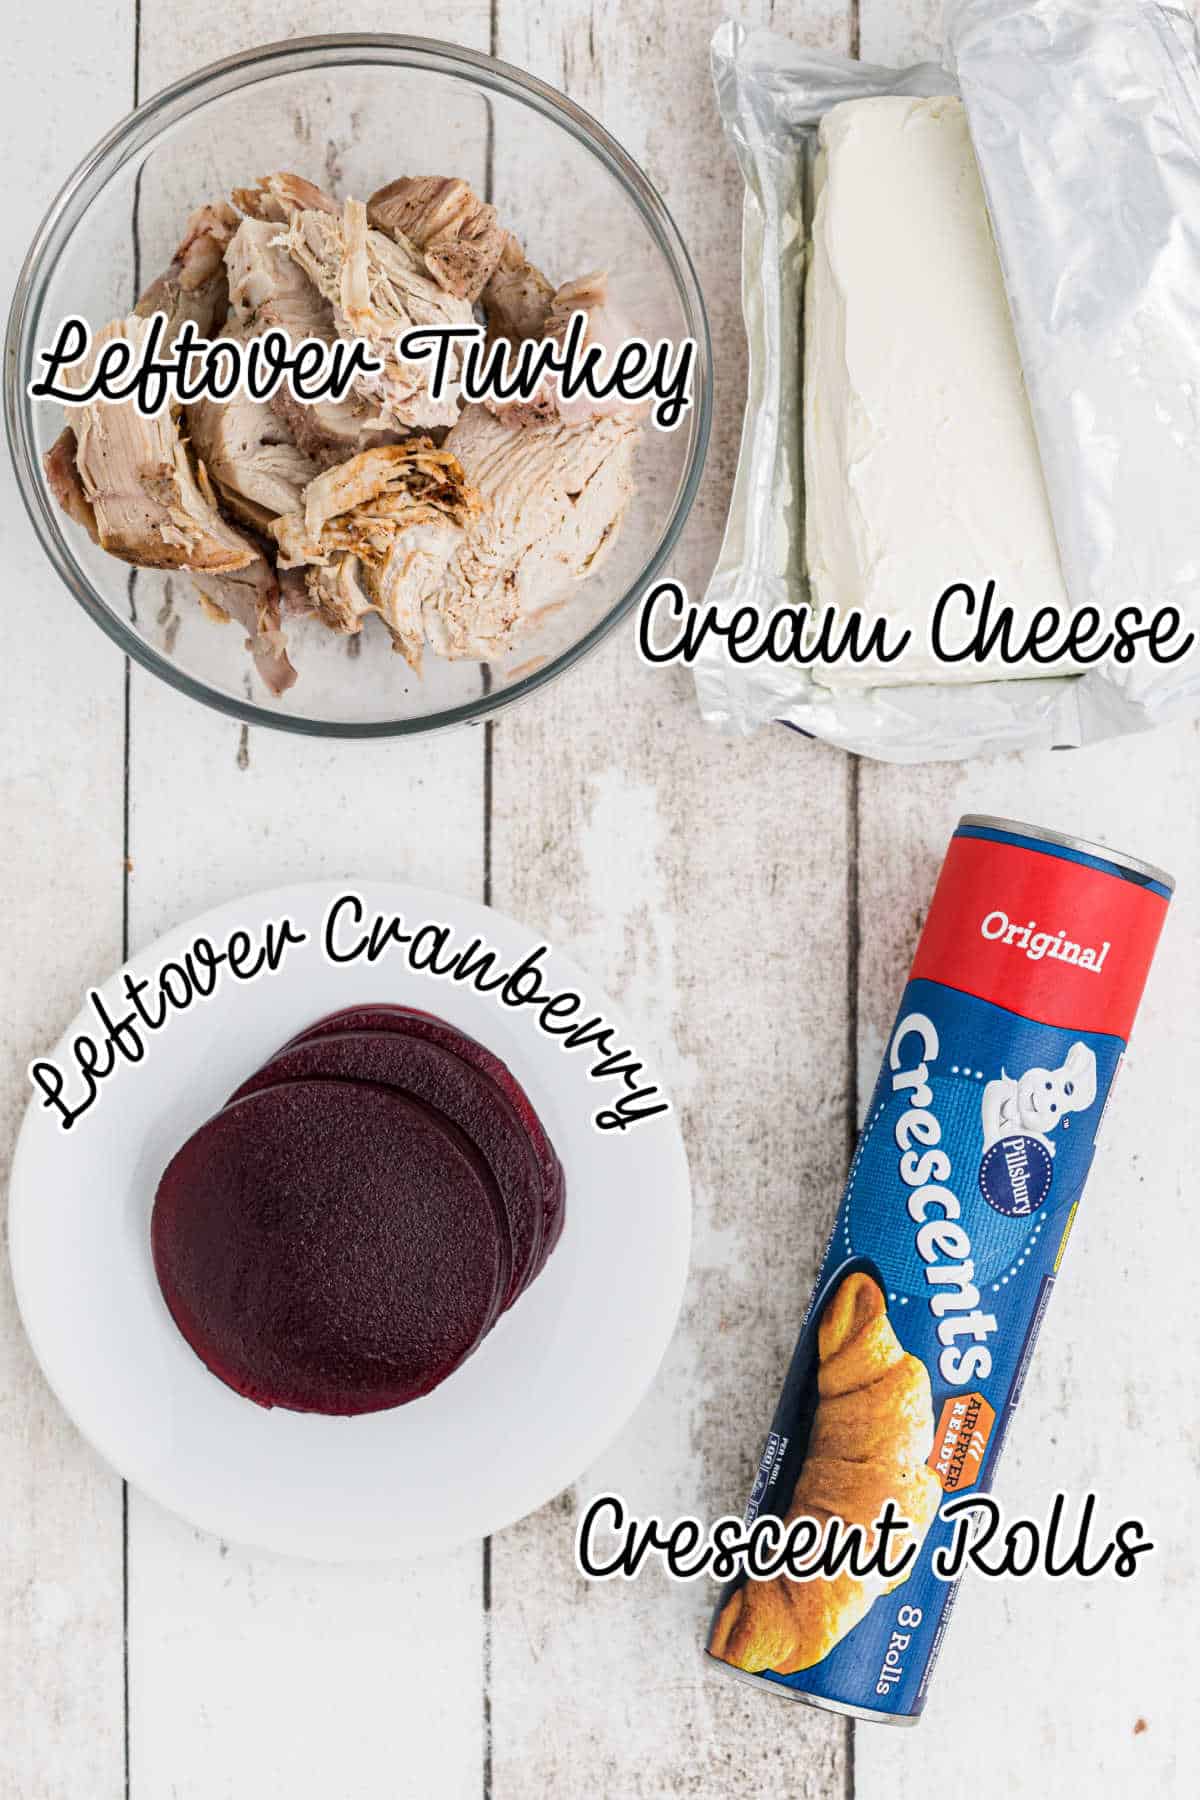 Ingredients laid out showing how to make leftover turkey roll ups with text overlay.